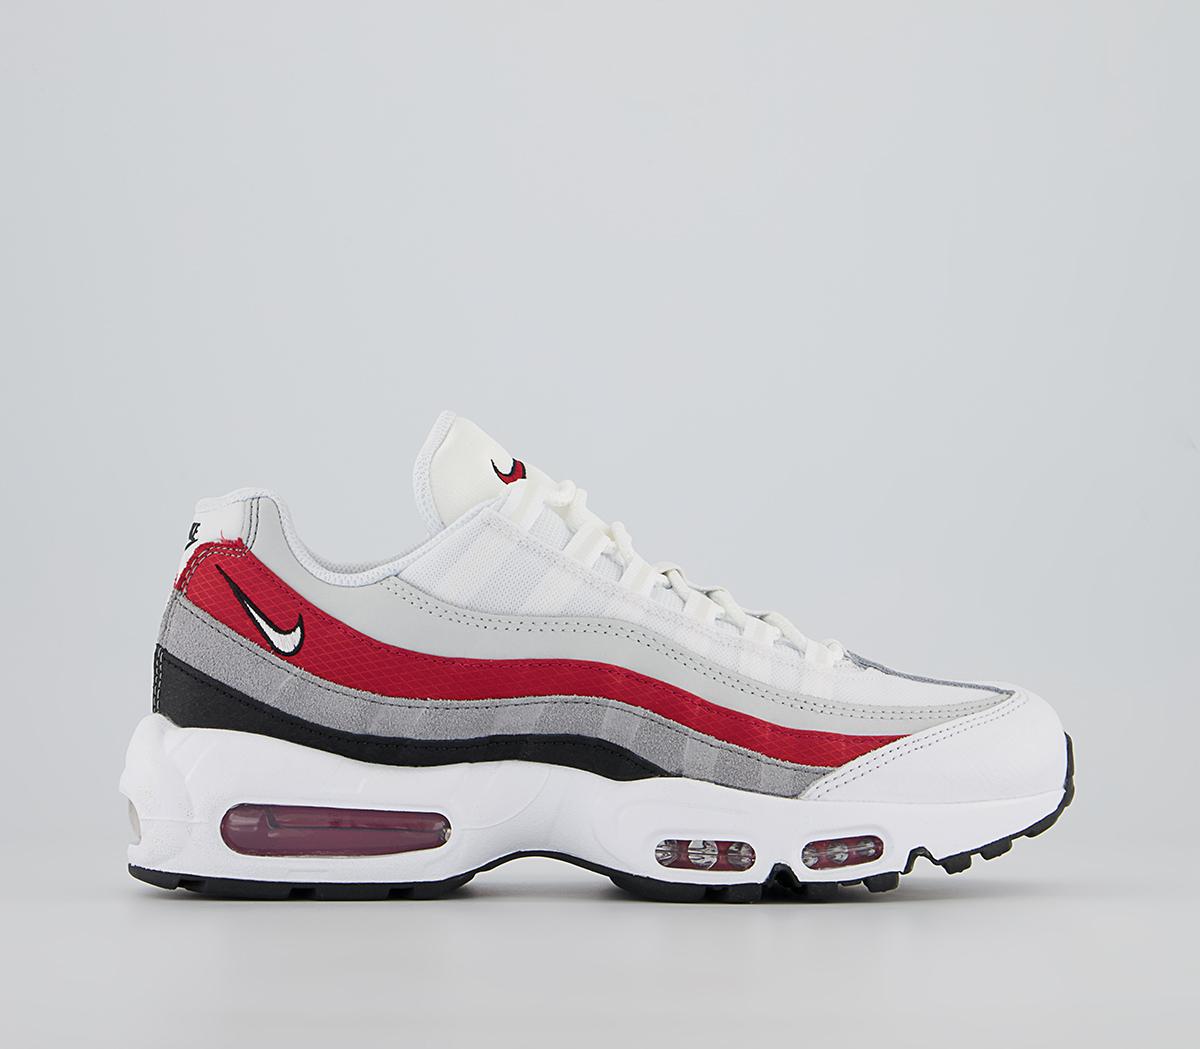 Nike Air Max 95 Trainers Black White Varsity Red Particle Grey - Unisex Sports